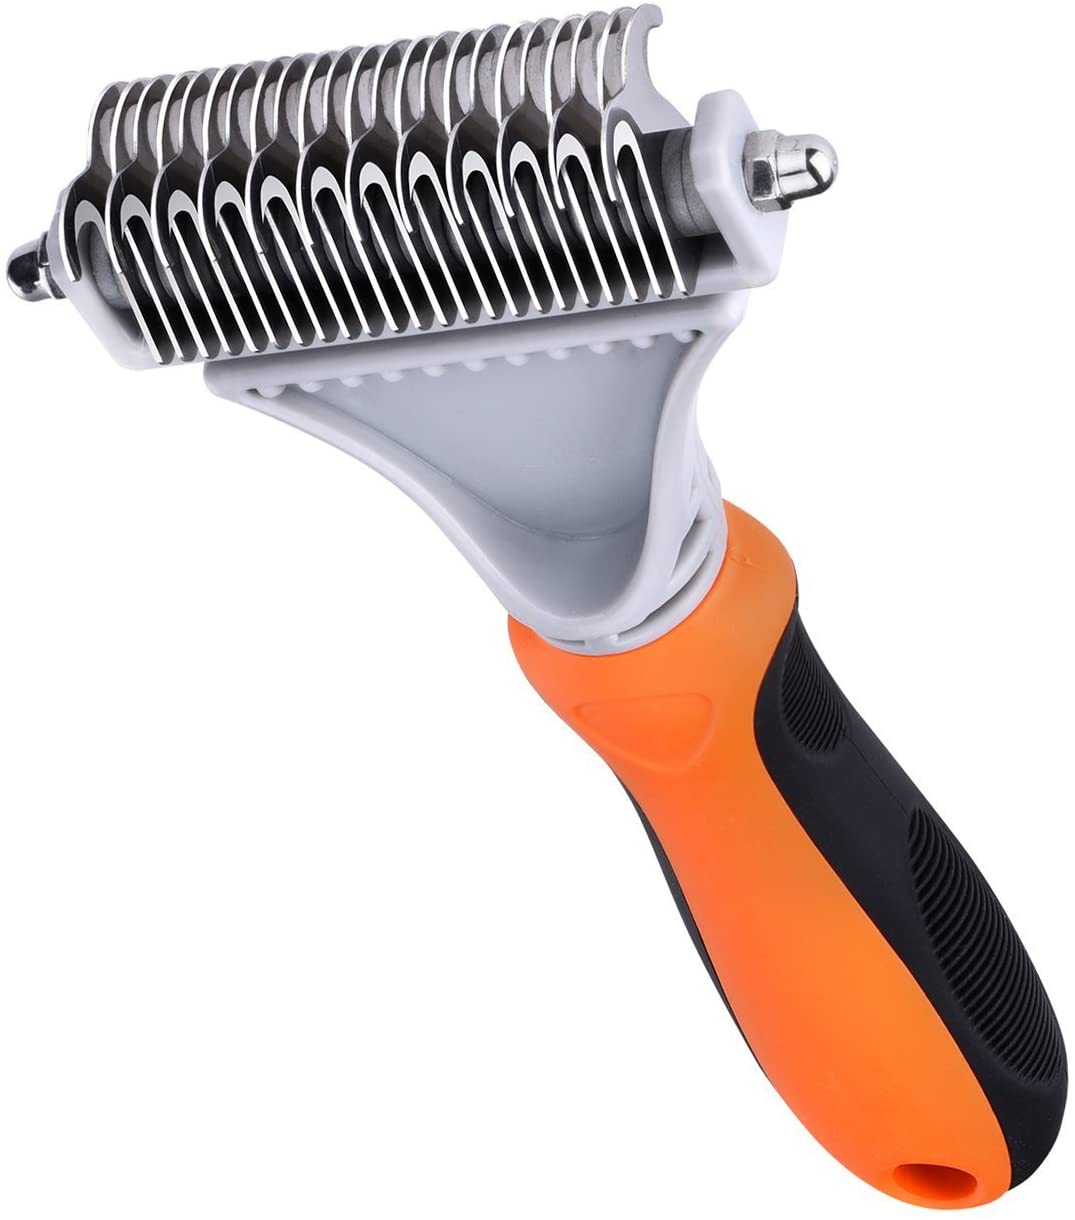 Pet Dematting Comb, Double Sided Grooming Brush Tool for Dogs & Cats - e4cents